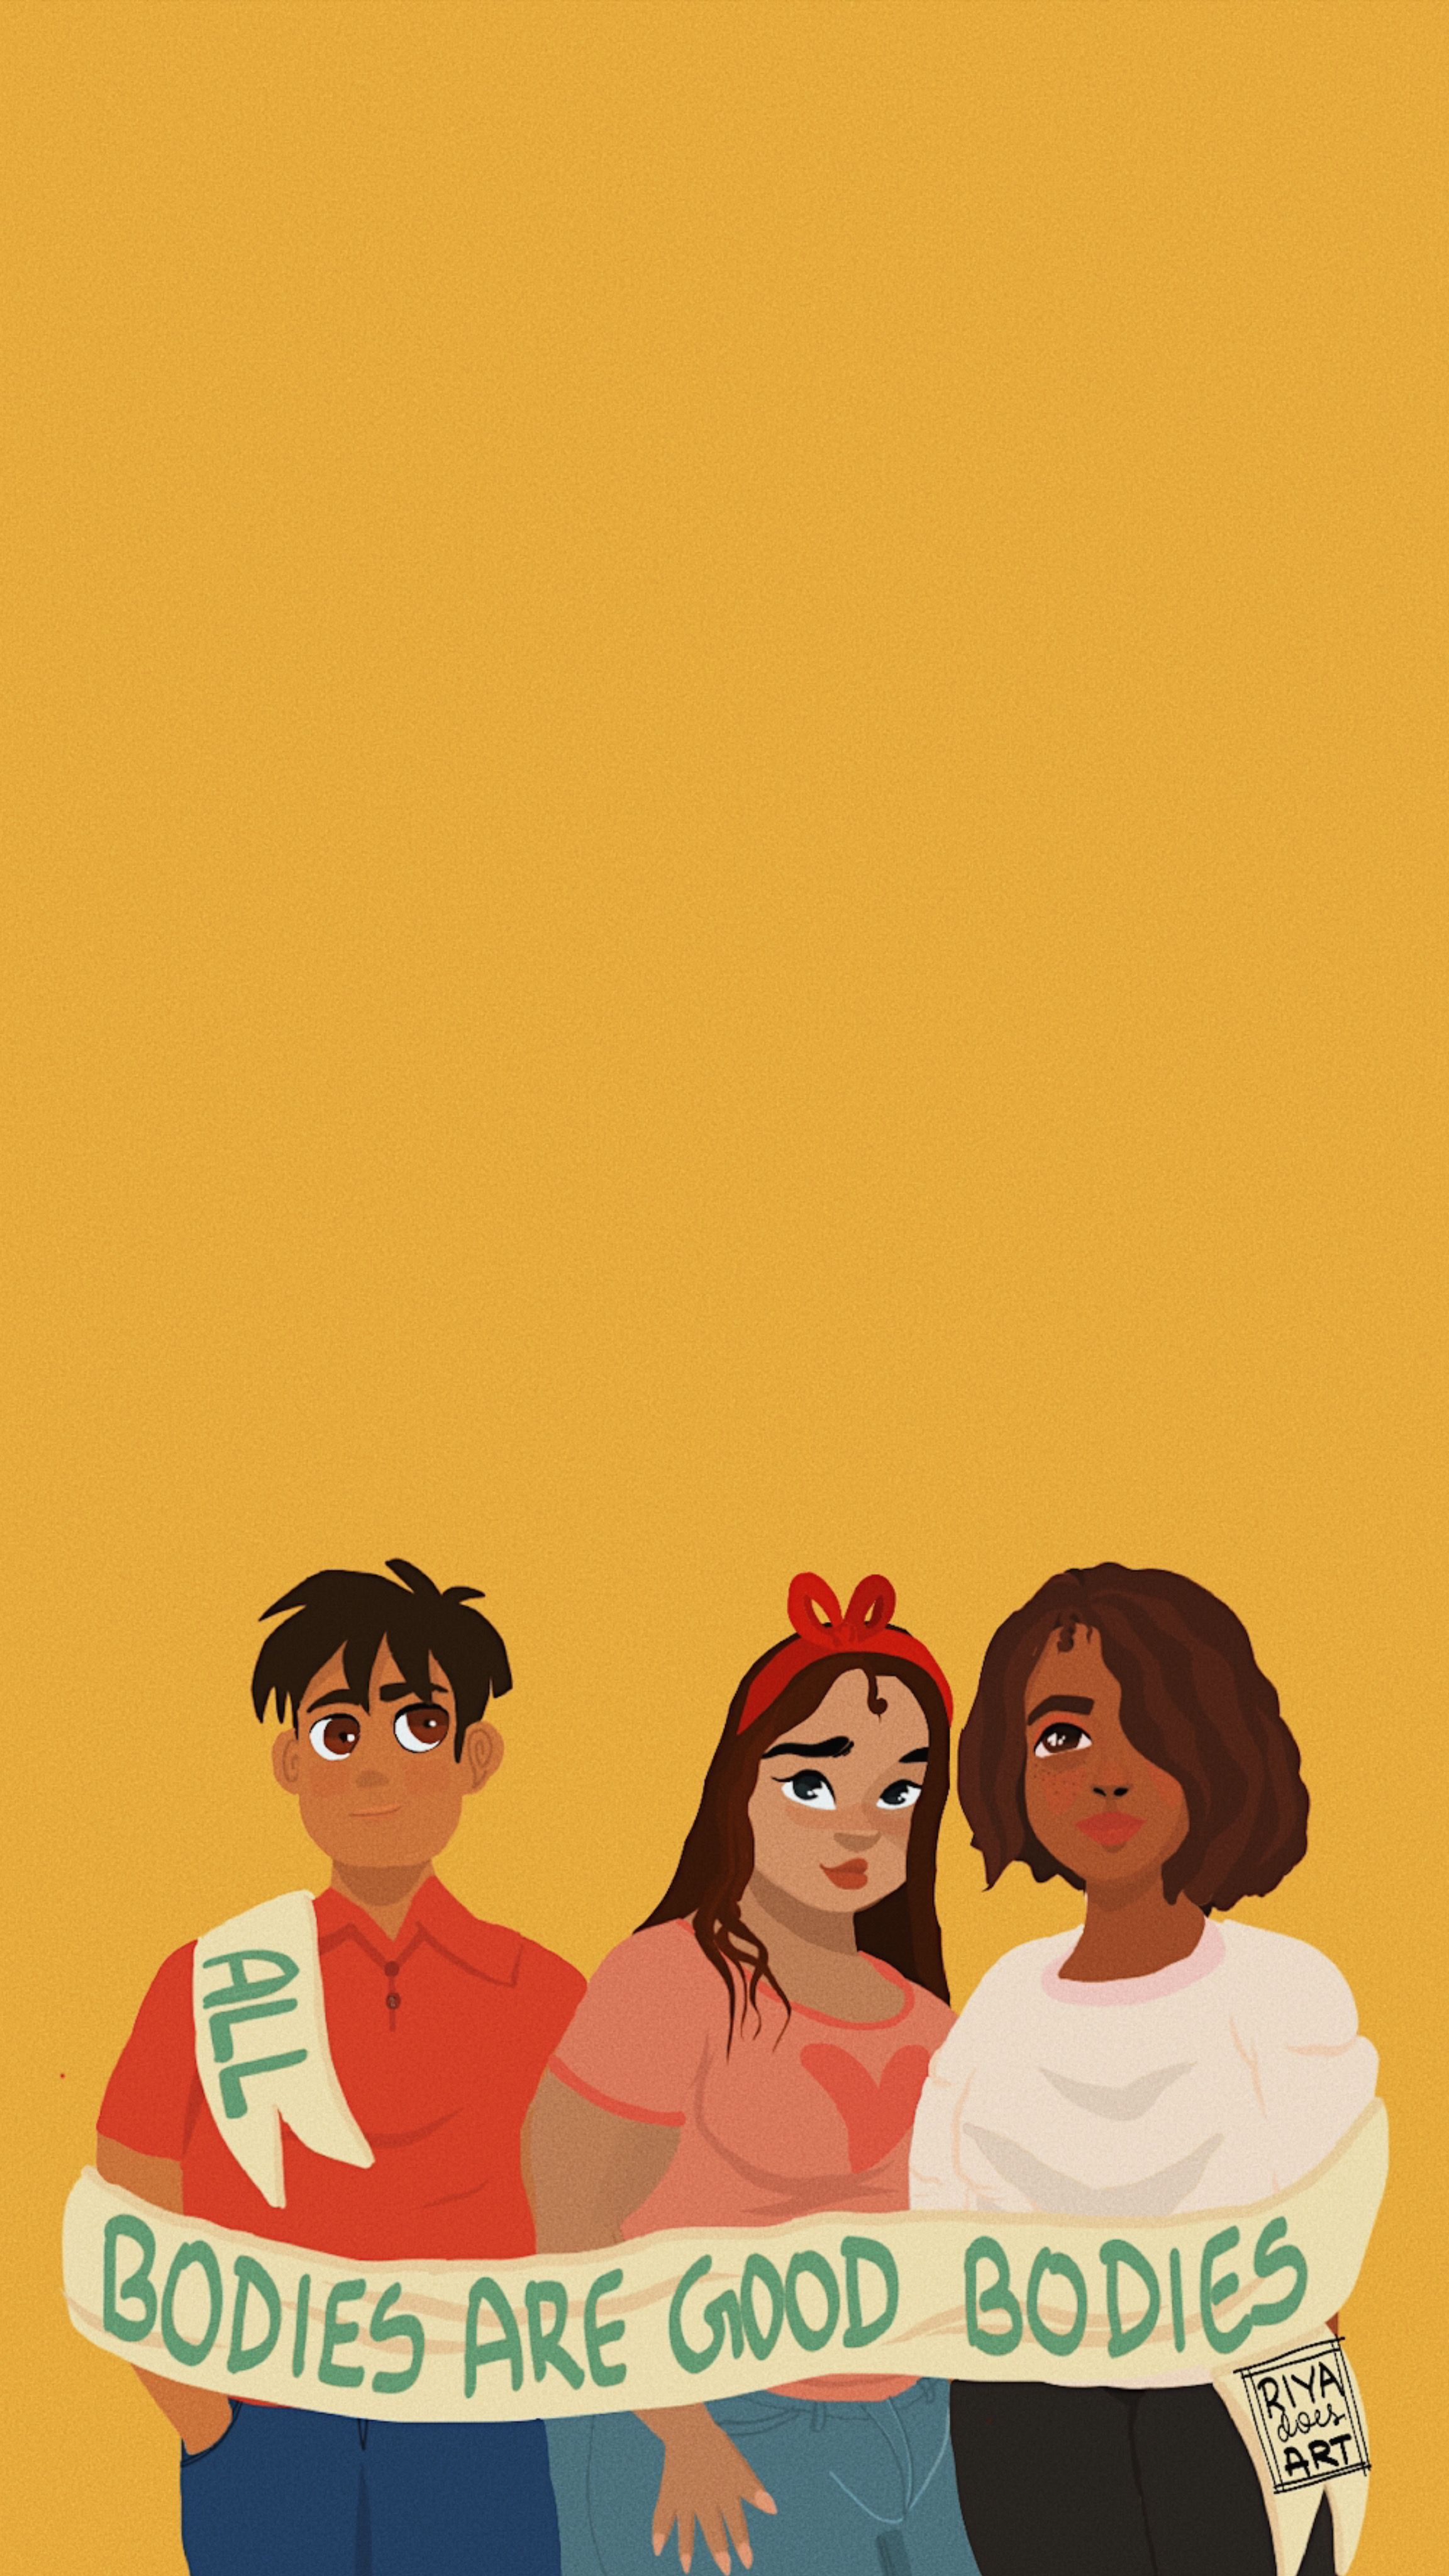 An illustration of three people of different races and sizes holding a banner that says 